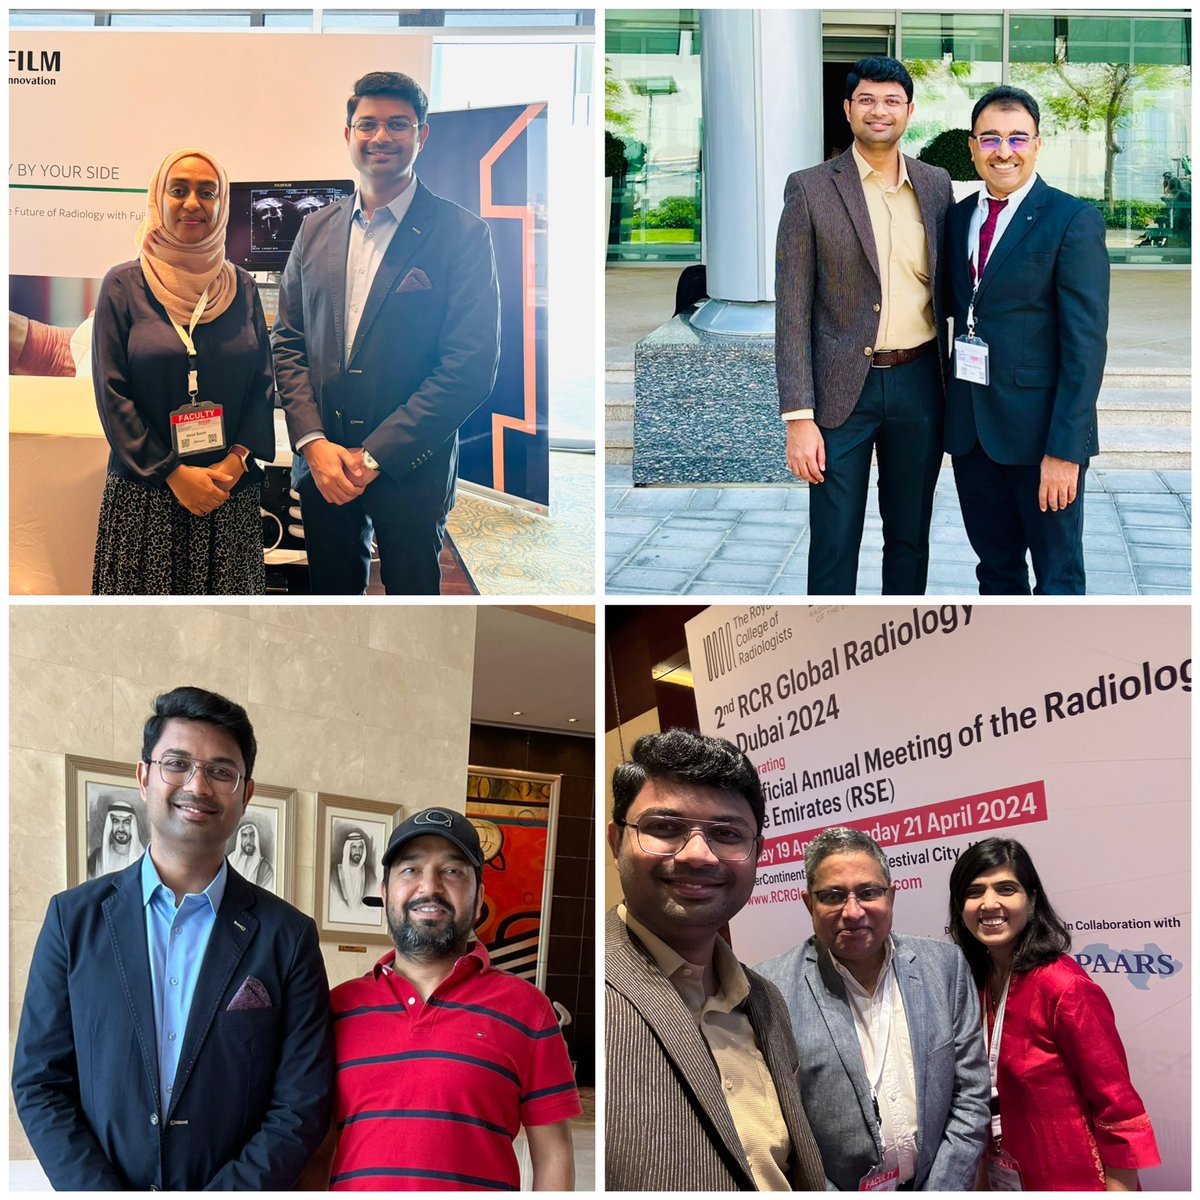 Just spent an amazing two day sessions at the 2 nd RCR Global conference , Dubai .Hearing their insights and experiences was truly inspiring. Great to connect and learn from the best @AmalSalehNour @drjoshivarsha @RamVaidhyanath @samrad77 @mskteachingroom @RCRadiologists